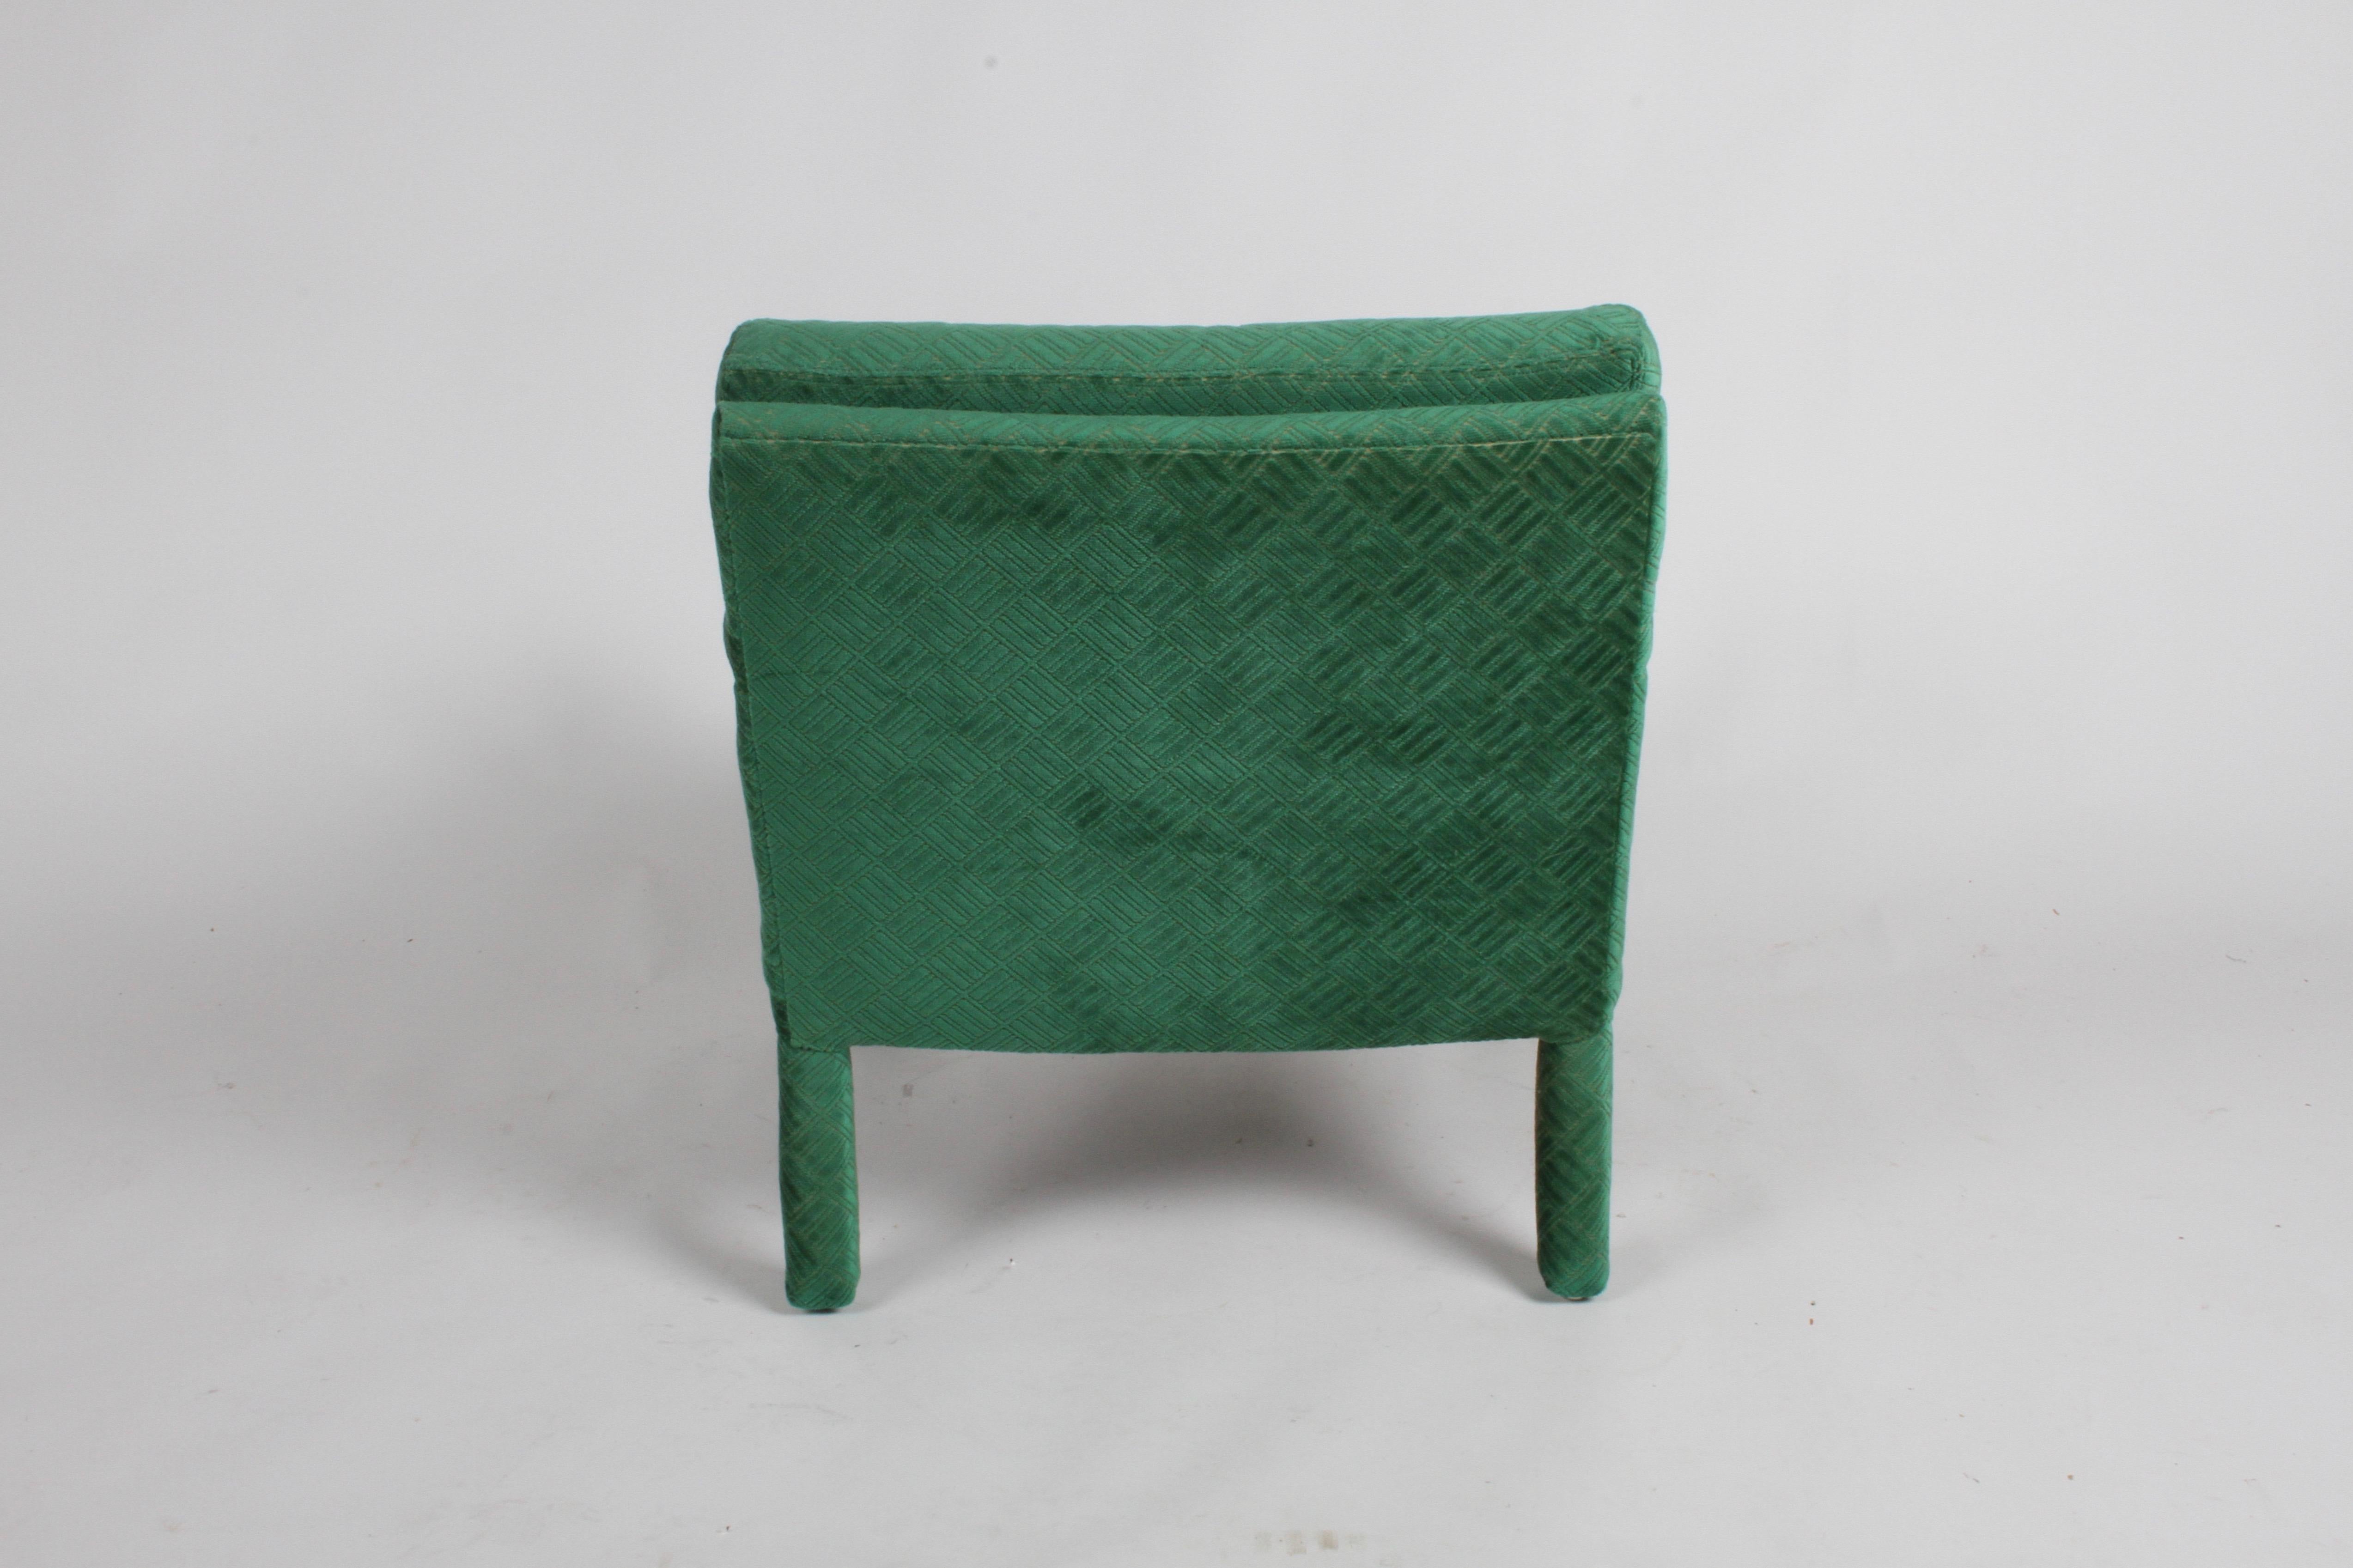 Pair of 1970s Directional Lounge Chairs in a Textured Emerald Green Upholstery 5